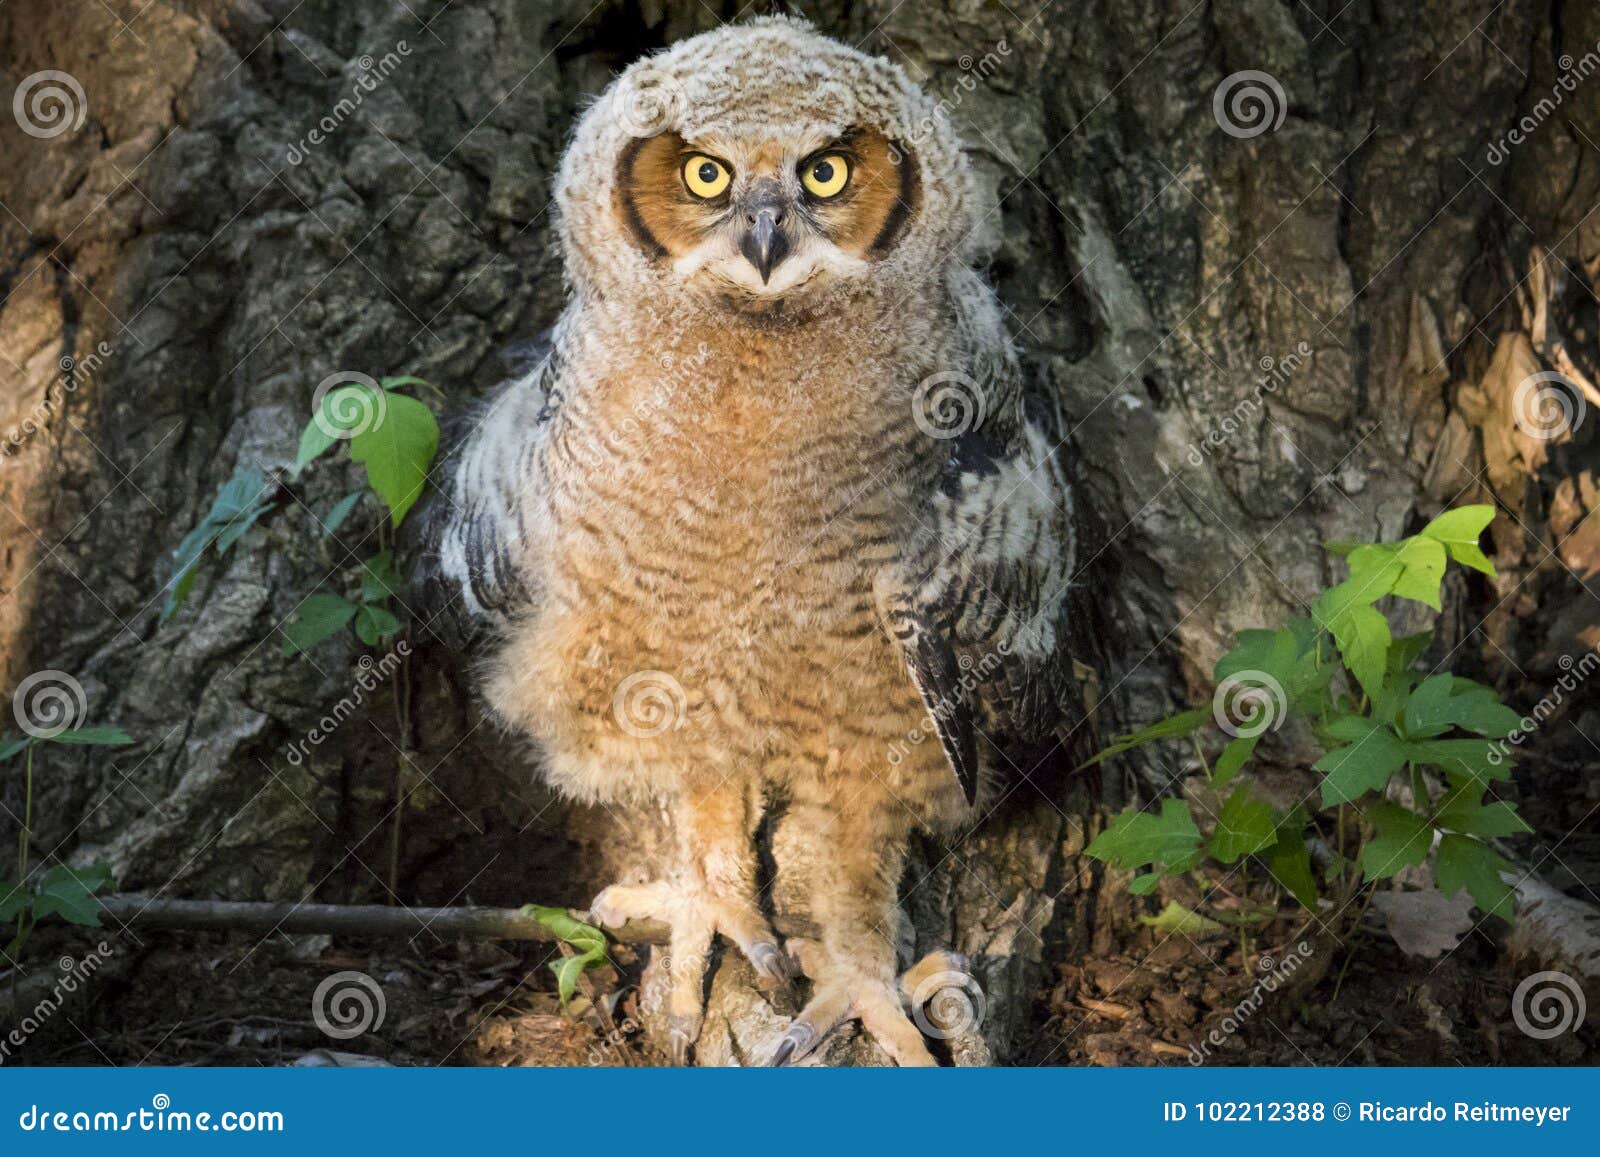 young great horned owl against poison ivy and cottonwood tree